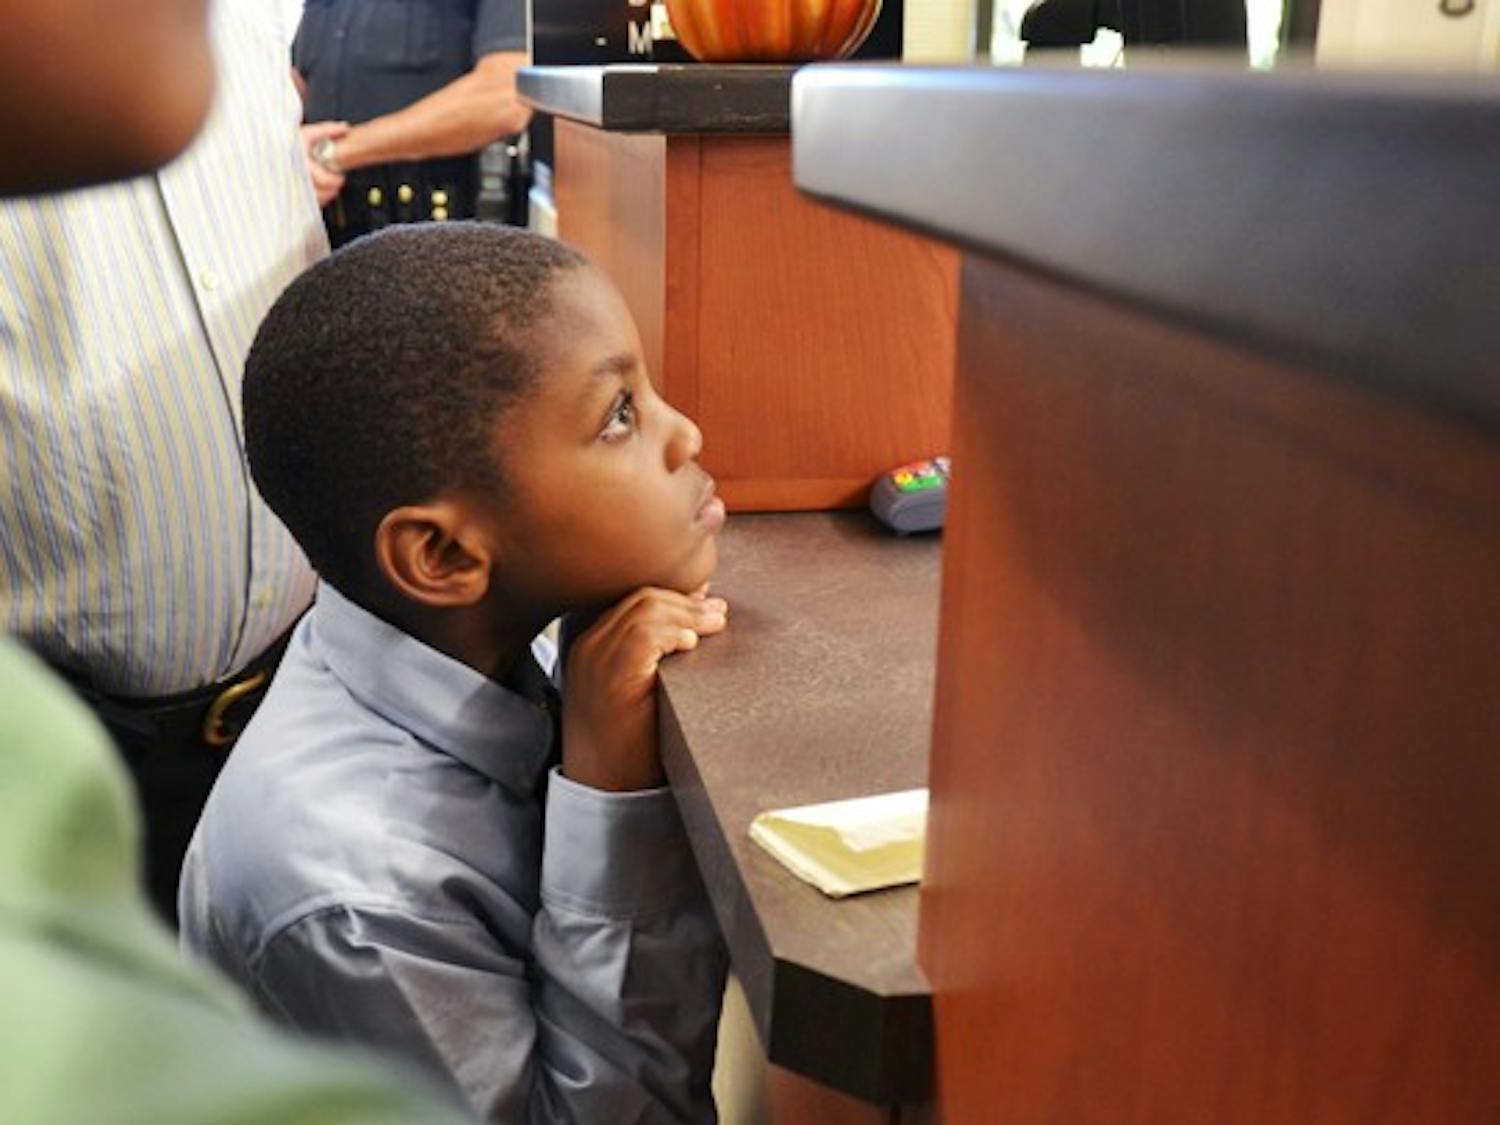 5 year old Oliver watching as his parents' aplpication for a marriage license gets denied